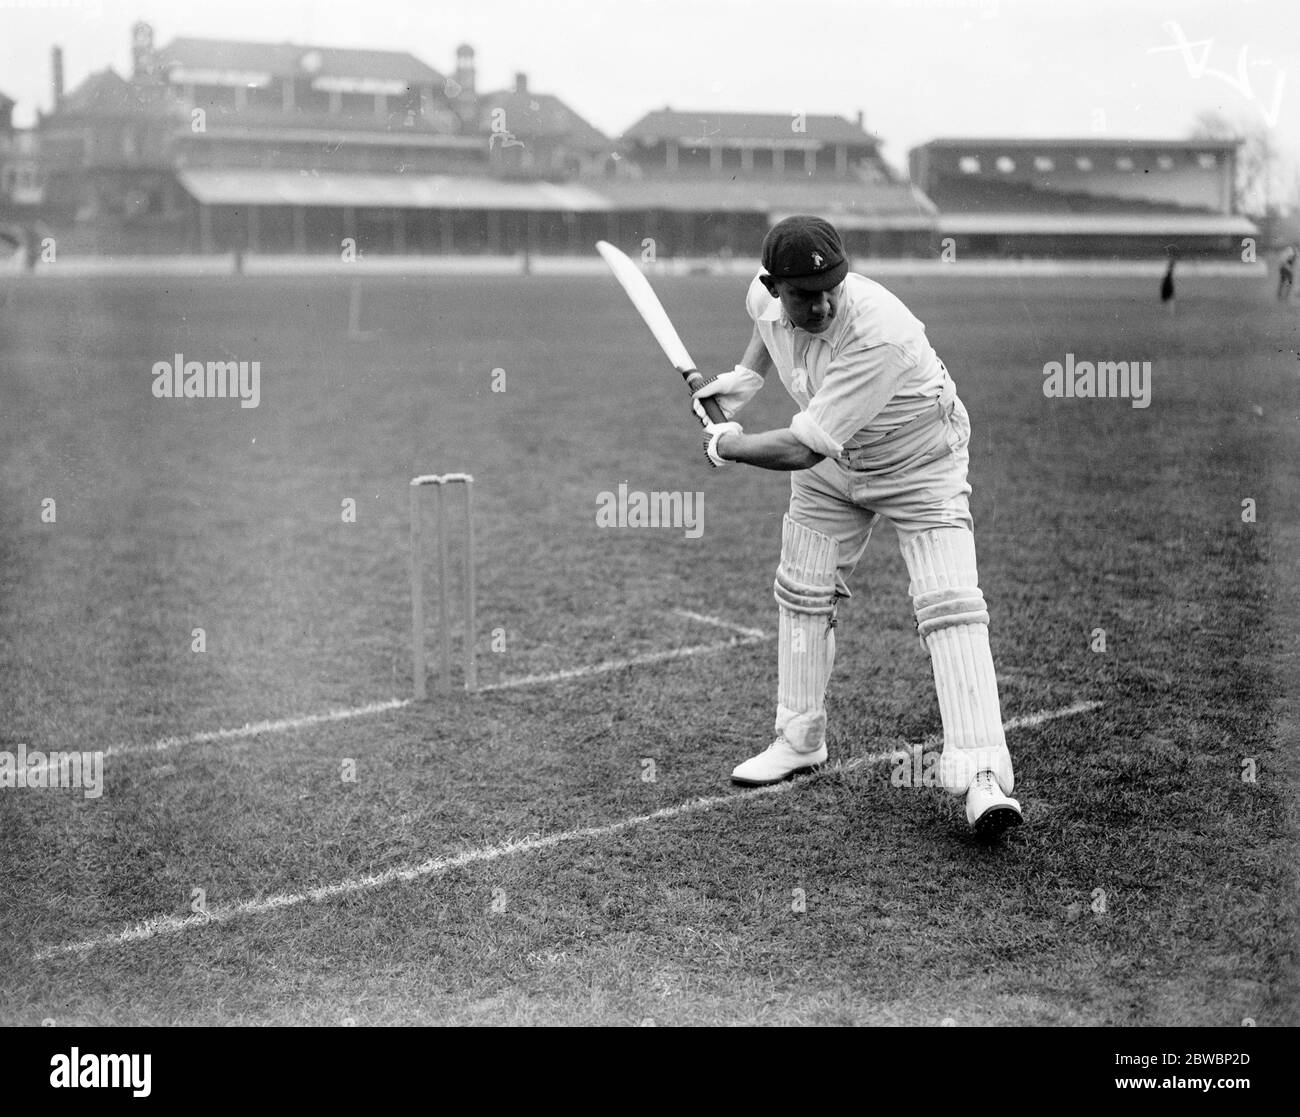 The South African cricket team at practice at Kennington oval . P A M Hands ( Western Province ) . Hands making a forward drive . 26 April 1924 Stock Photo